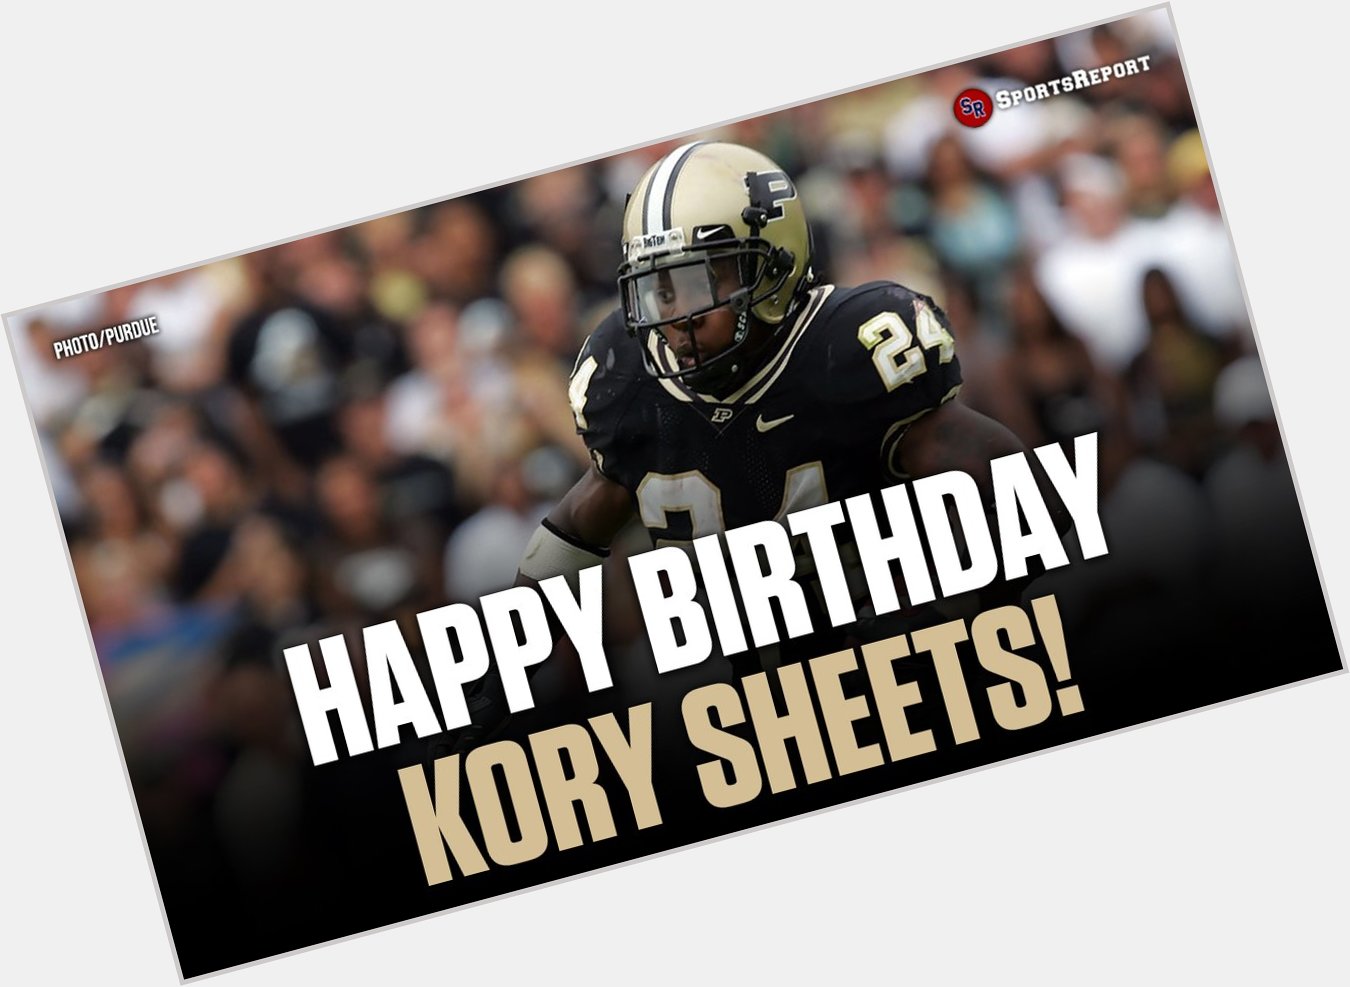  Fans, let\s wish great Kory Sheets a Happy Birthday! 